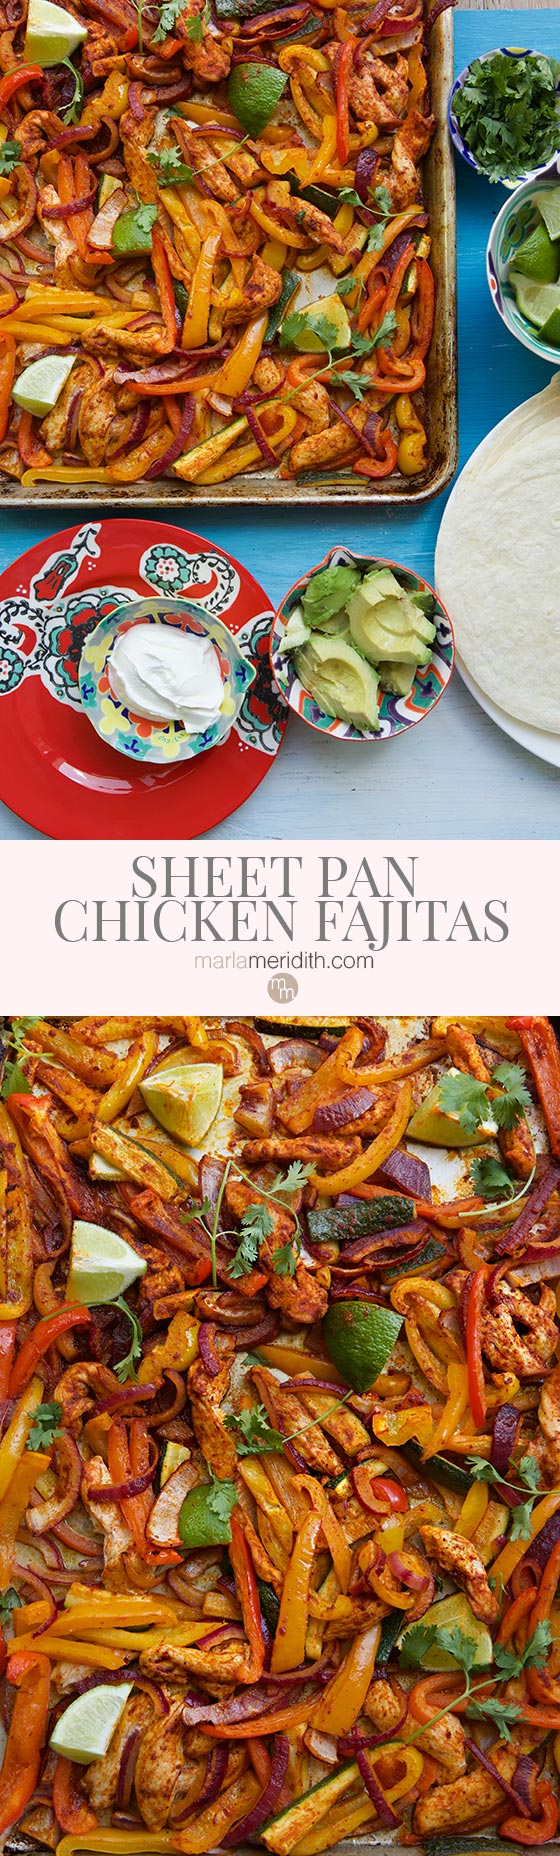 You've gotta try these delicious, simple, budget friendly Sheet Pan Chicken Fajitas! Get the recipe on MarlaMeridith.com